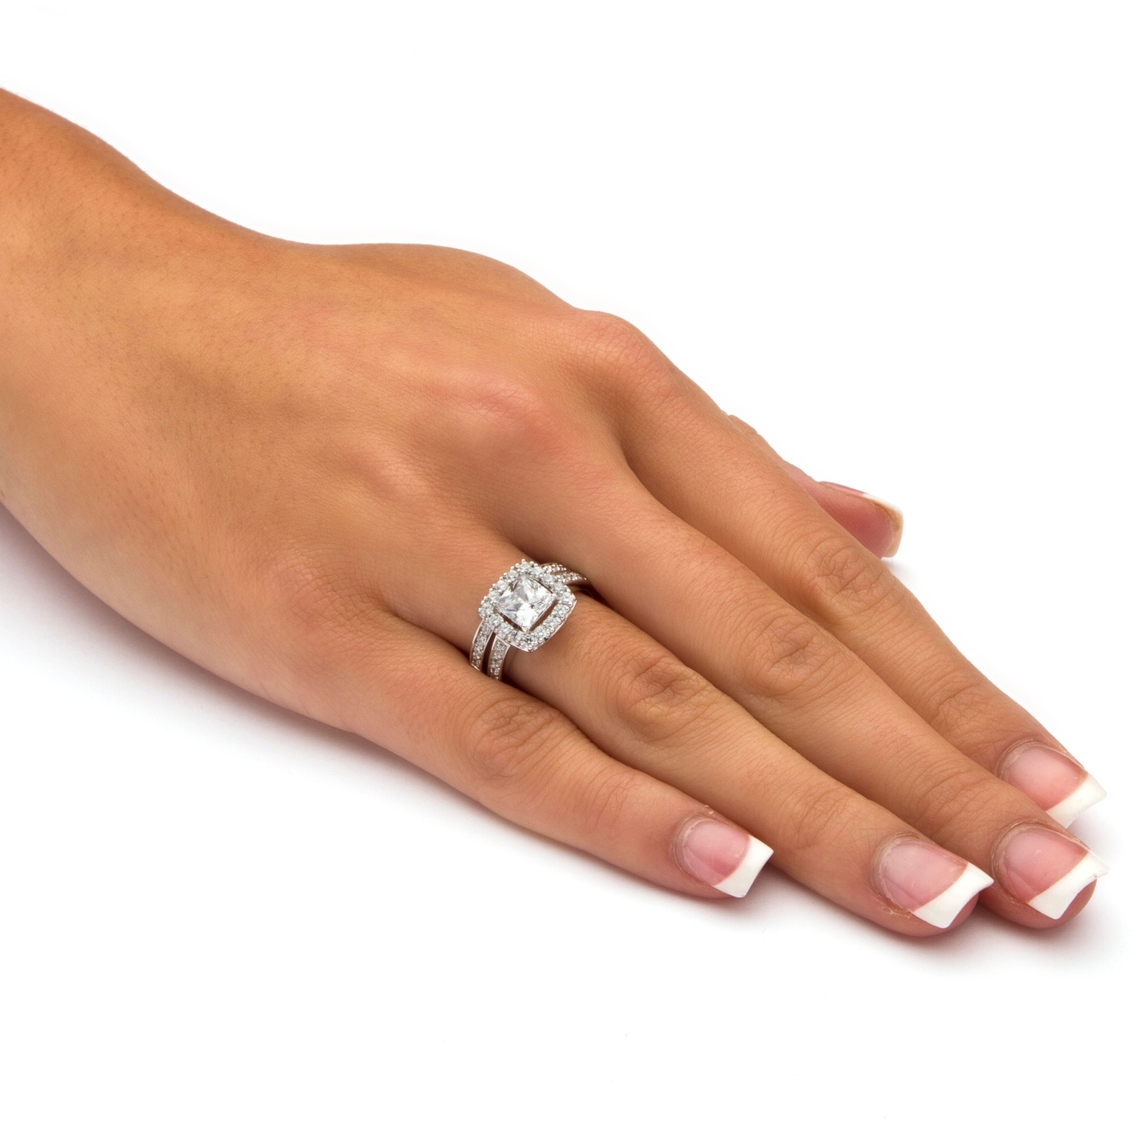 PalmBeach 2 Piece 1.93 TCW CZ Square Halo Bridal Ring Set in Solid 10k White Gold - Image 3 of 5